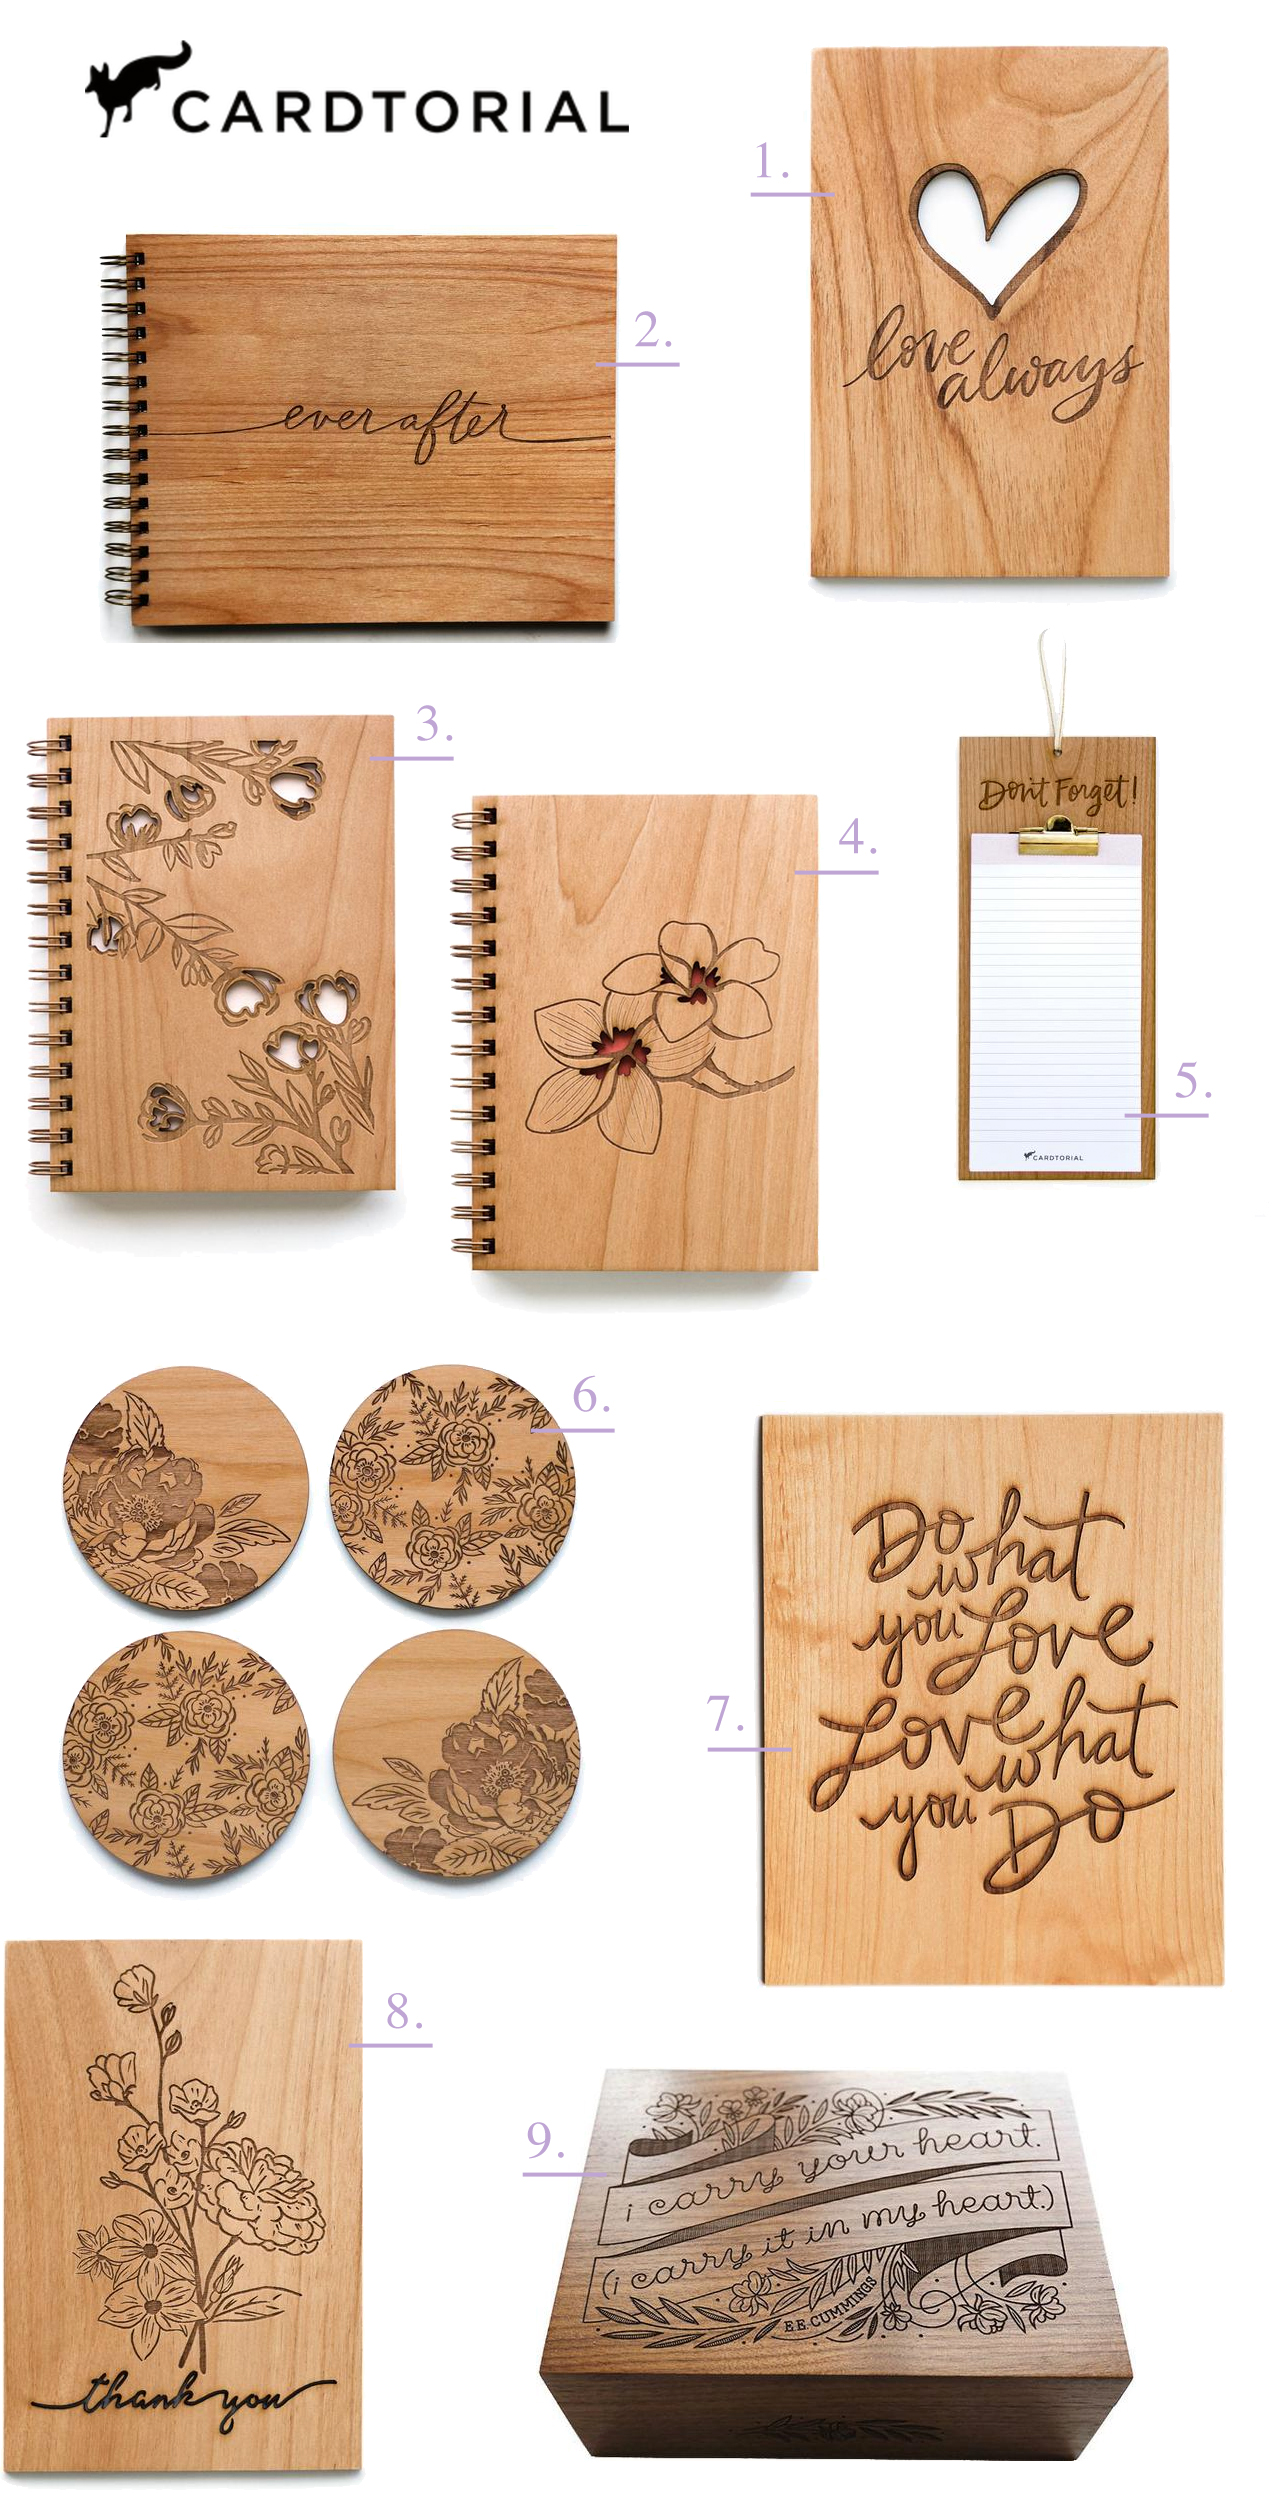 Cardtorial Wooden Gifts and Keepsake Stationery